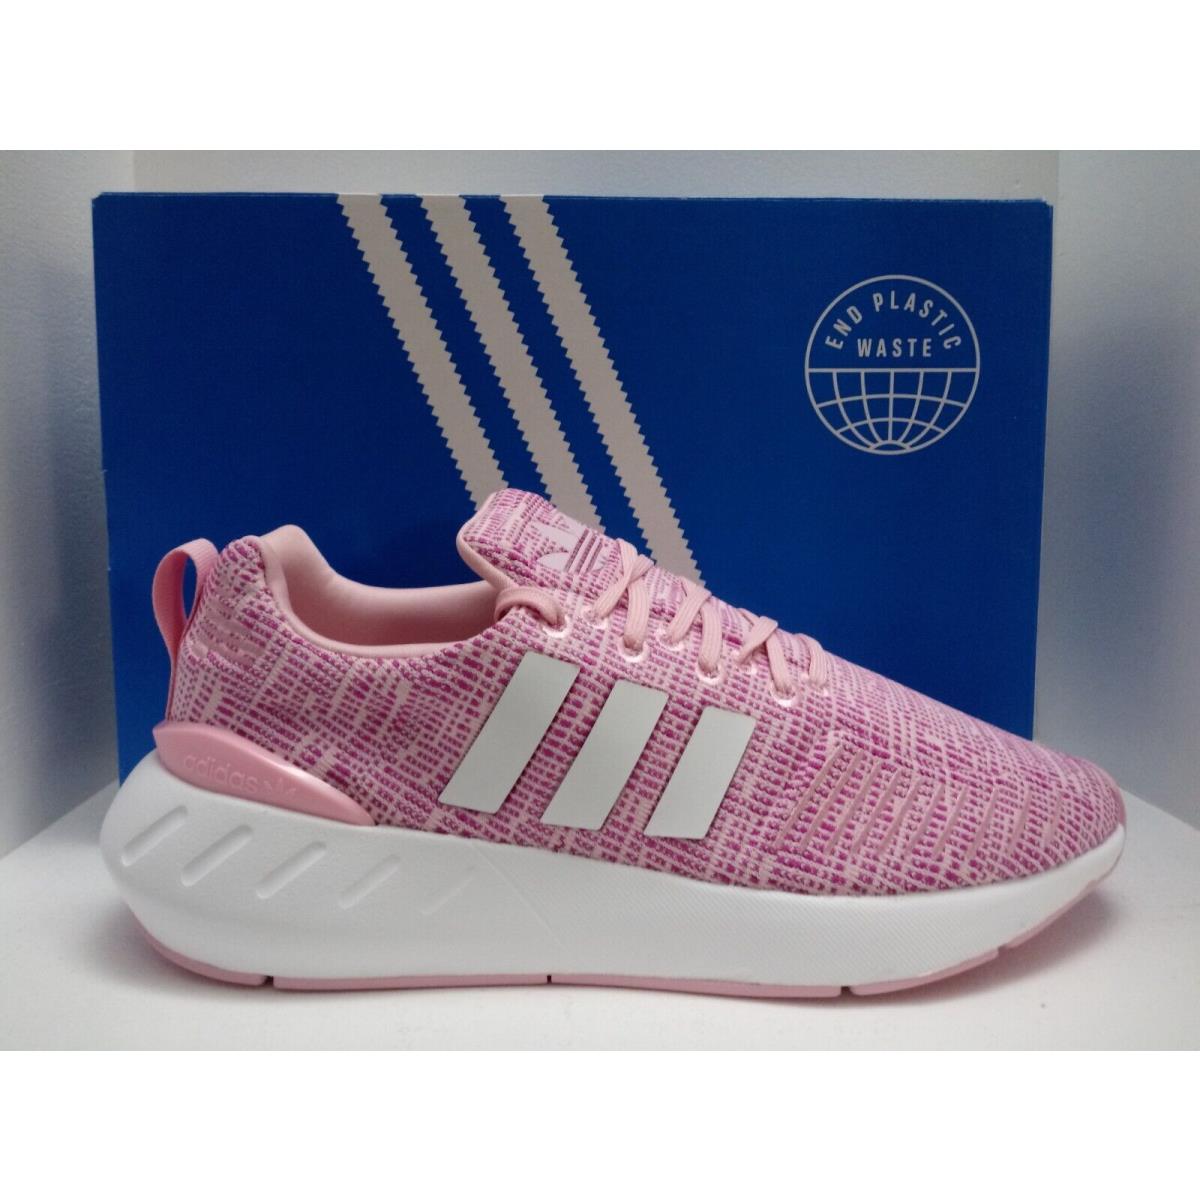 Adidas shoes  - PINK/WHITE 1